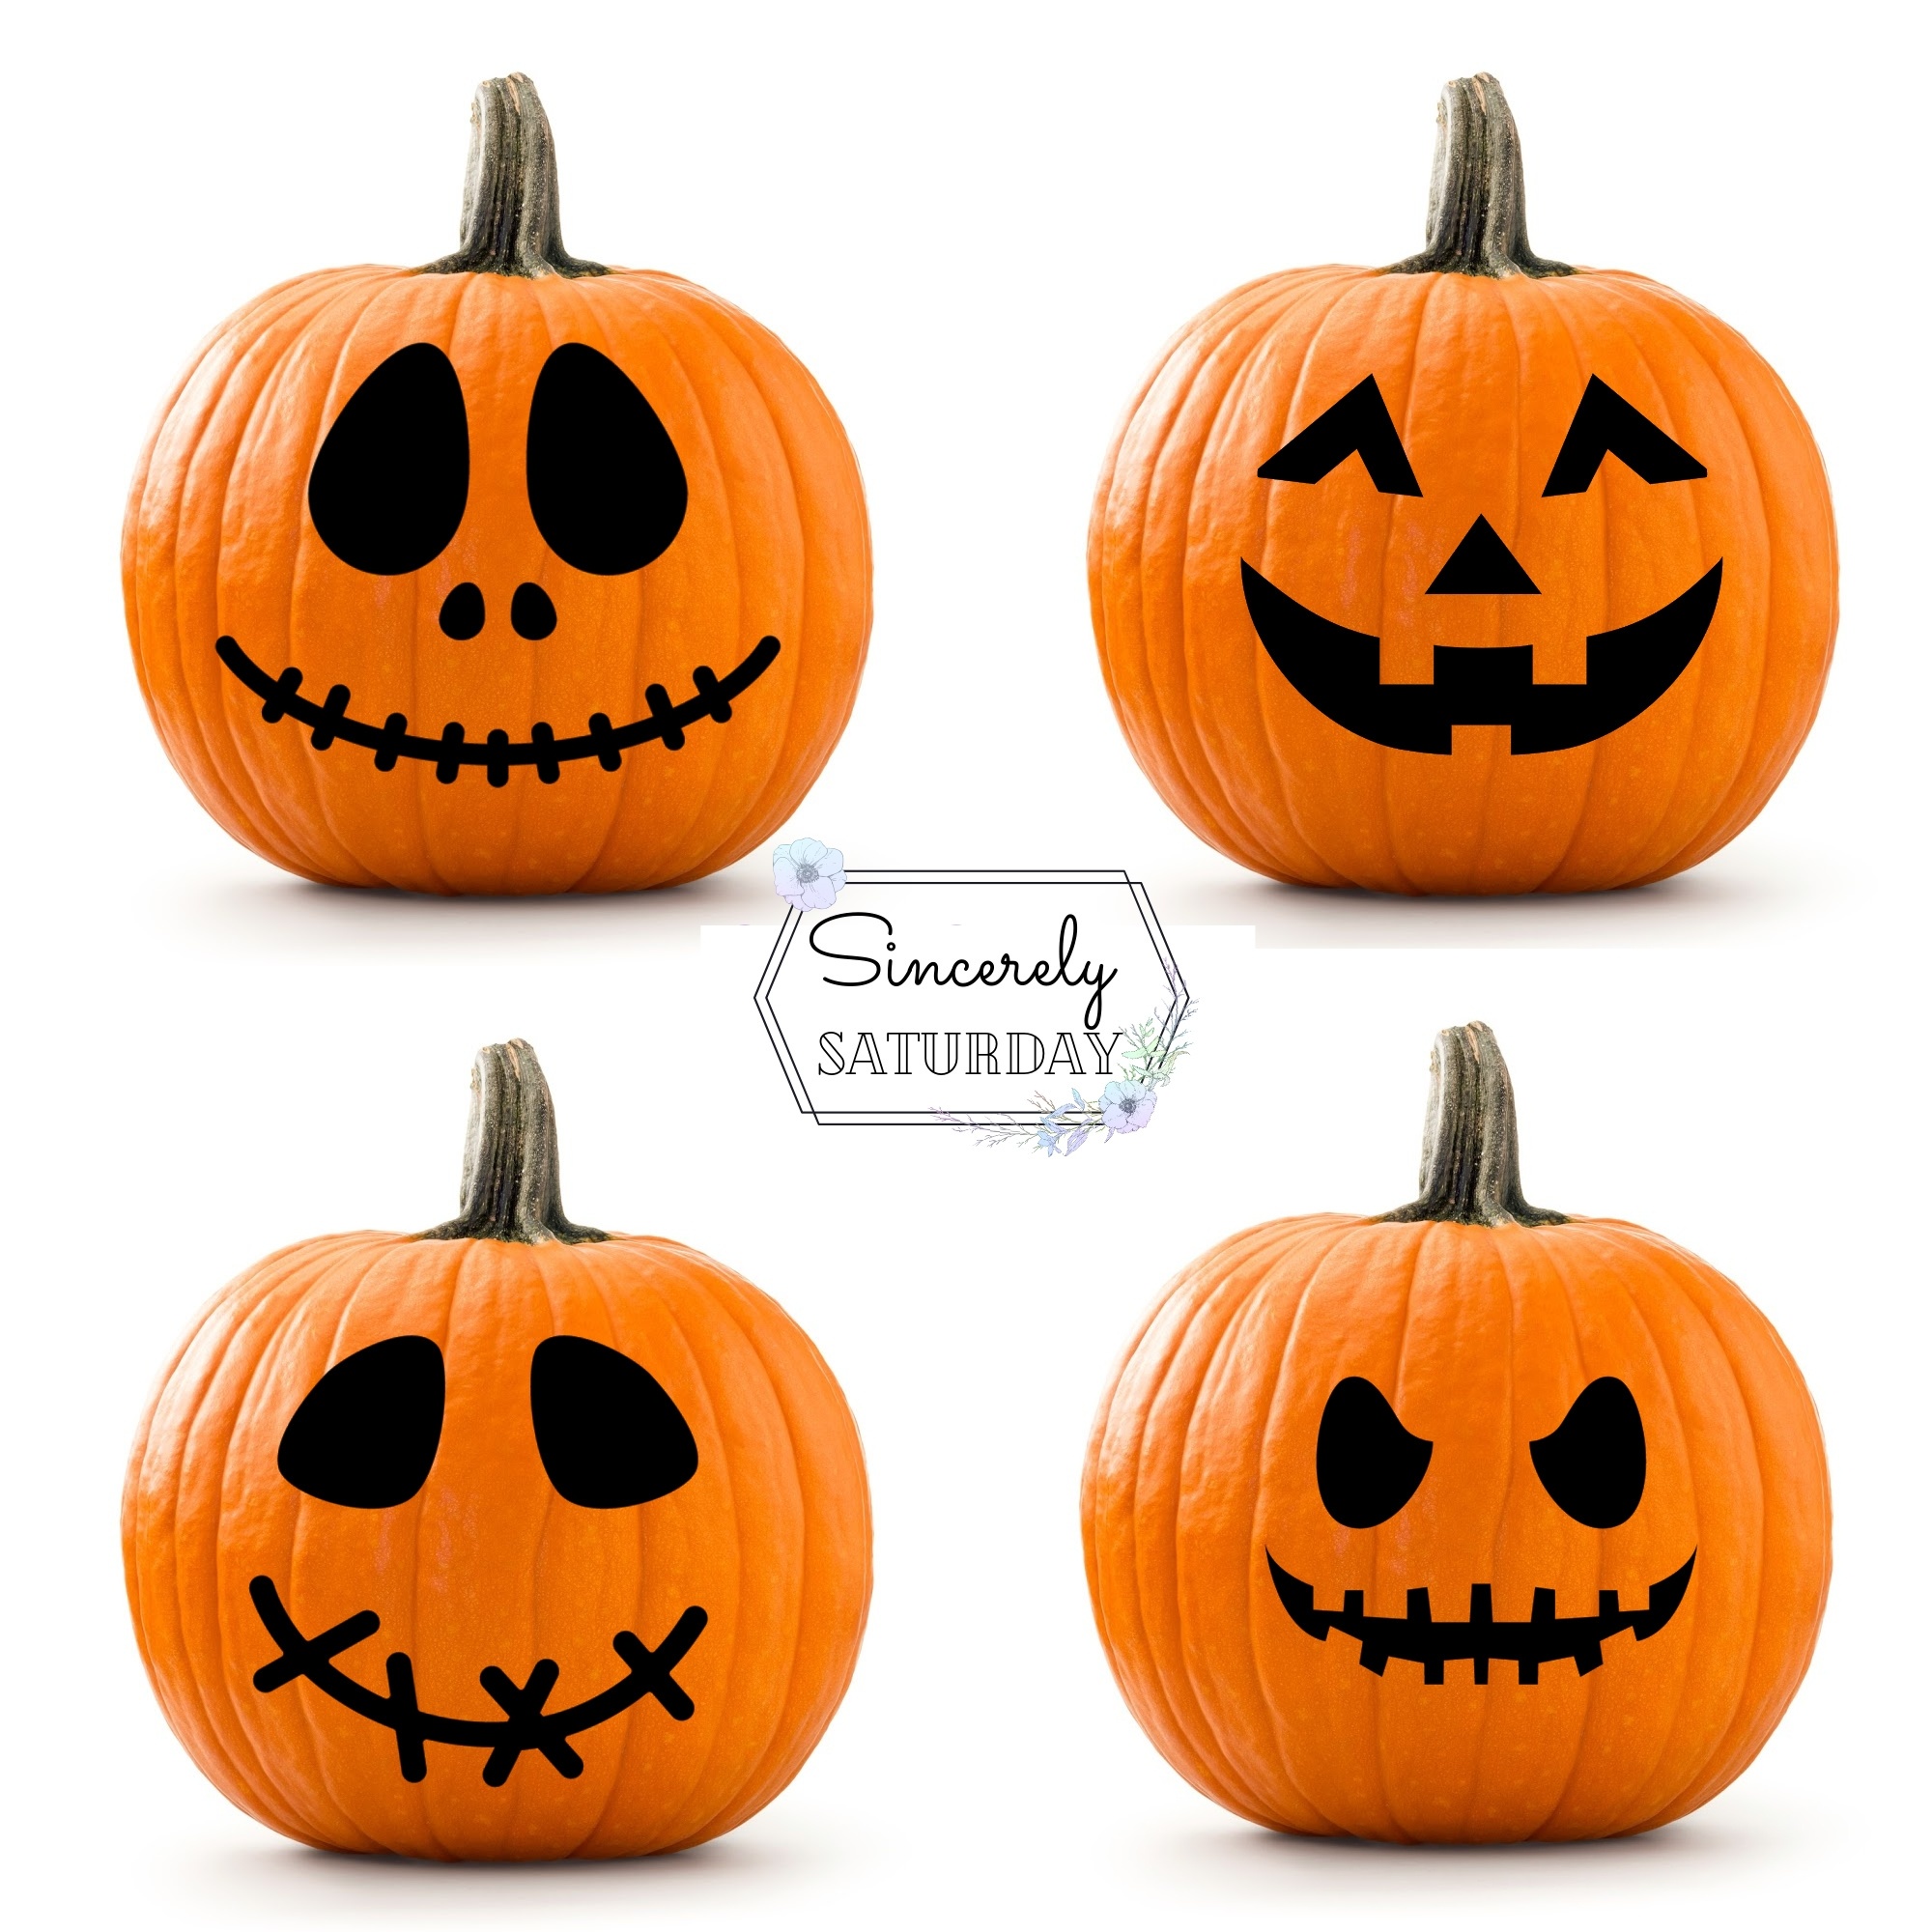 6 ways to celebrate Halloween or Harvest festivals while social distancing